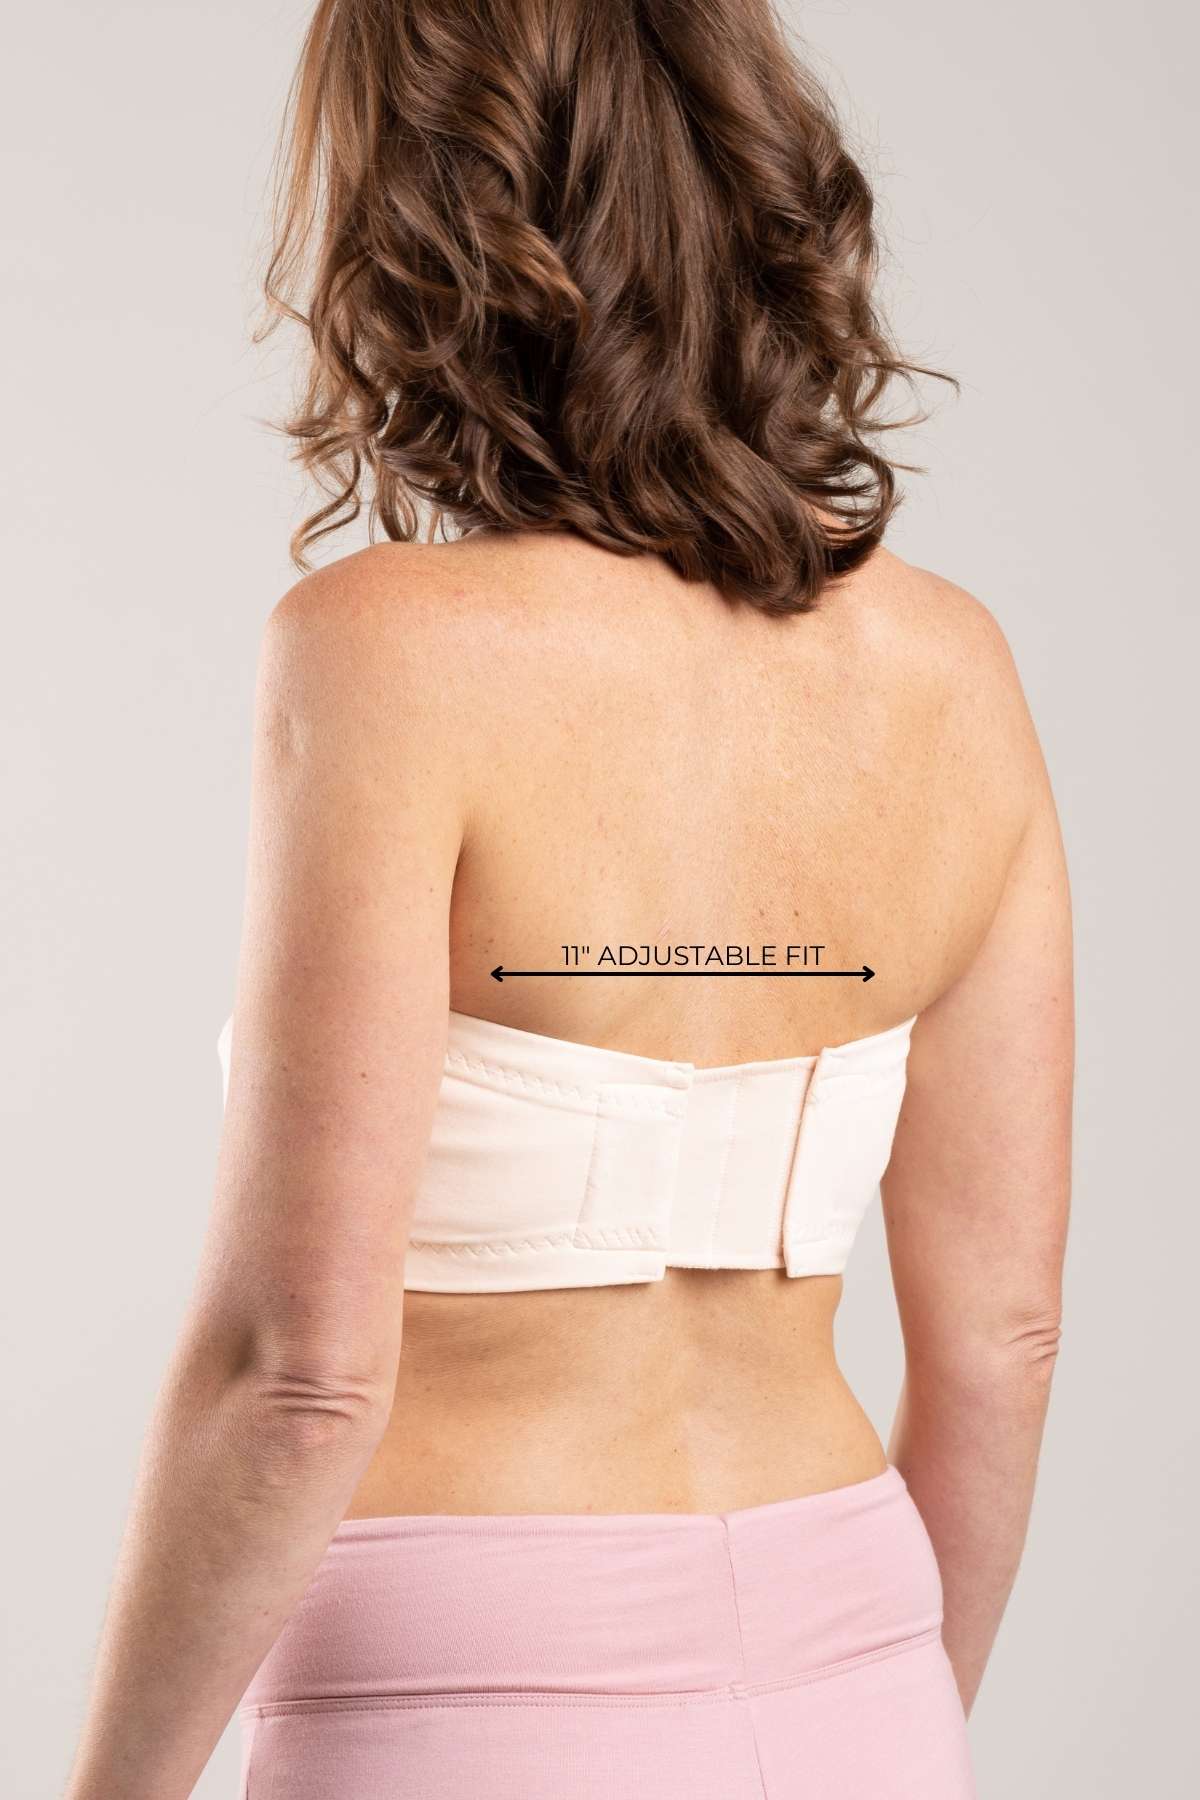 Simple Wishes Pumping Bra Review – Hands-Free Bustier - The